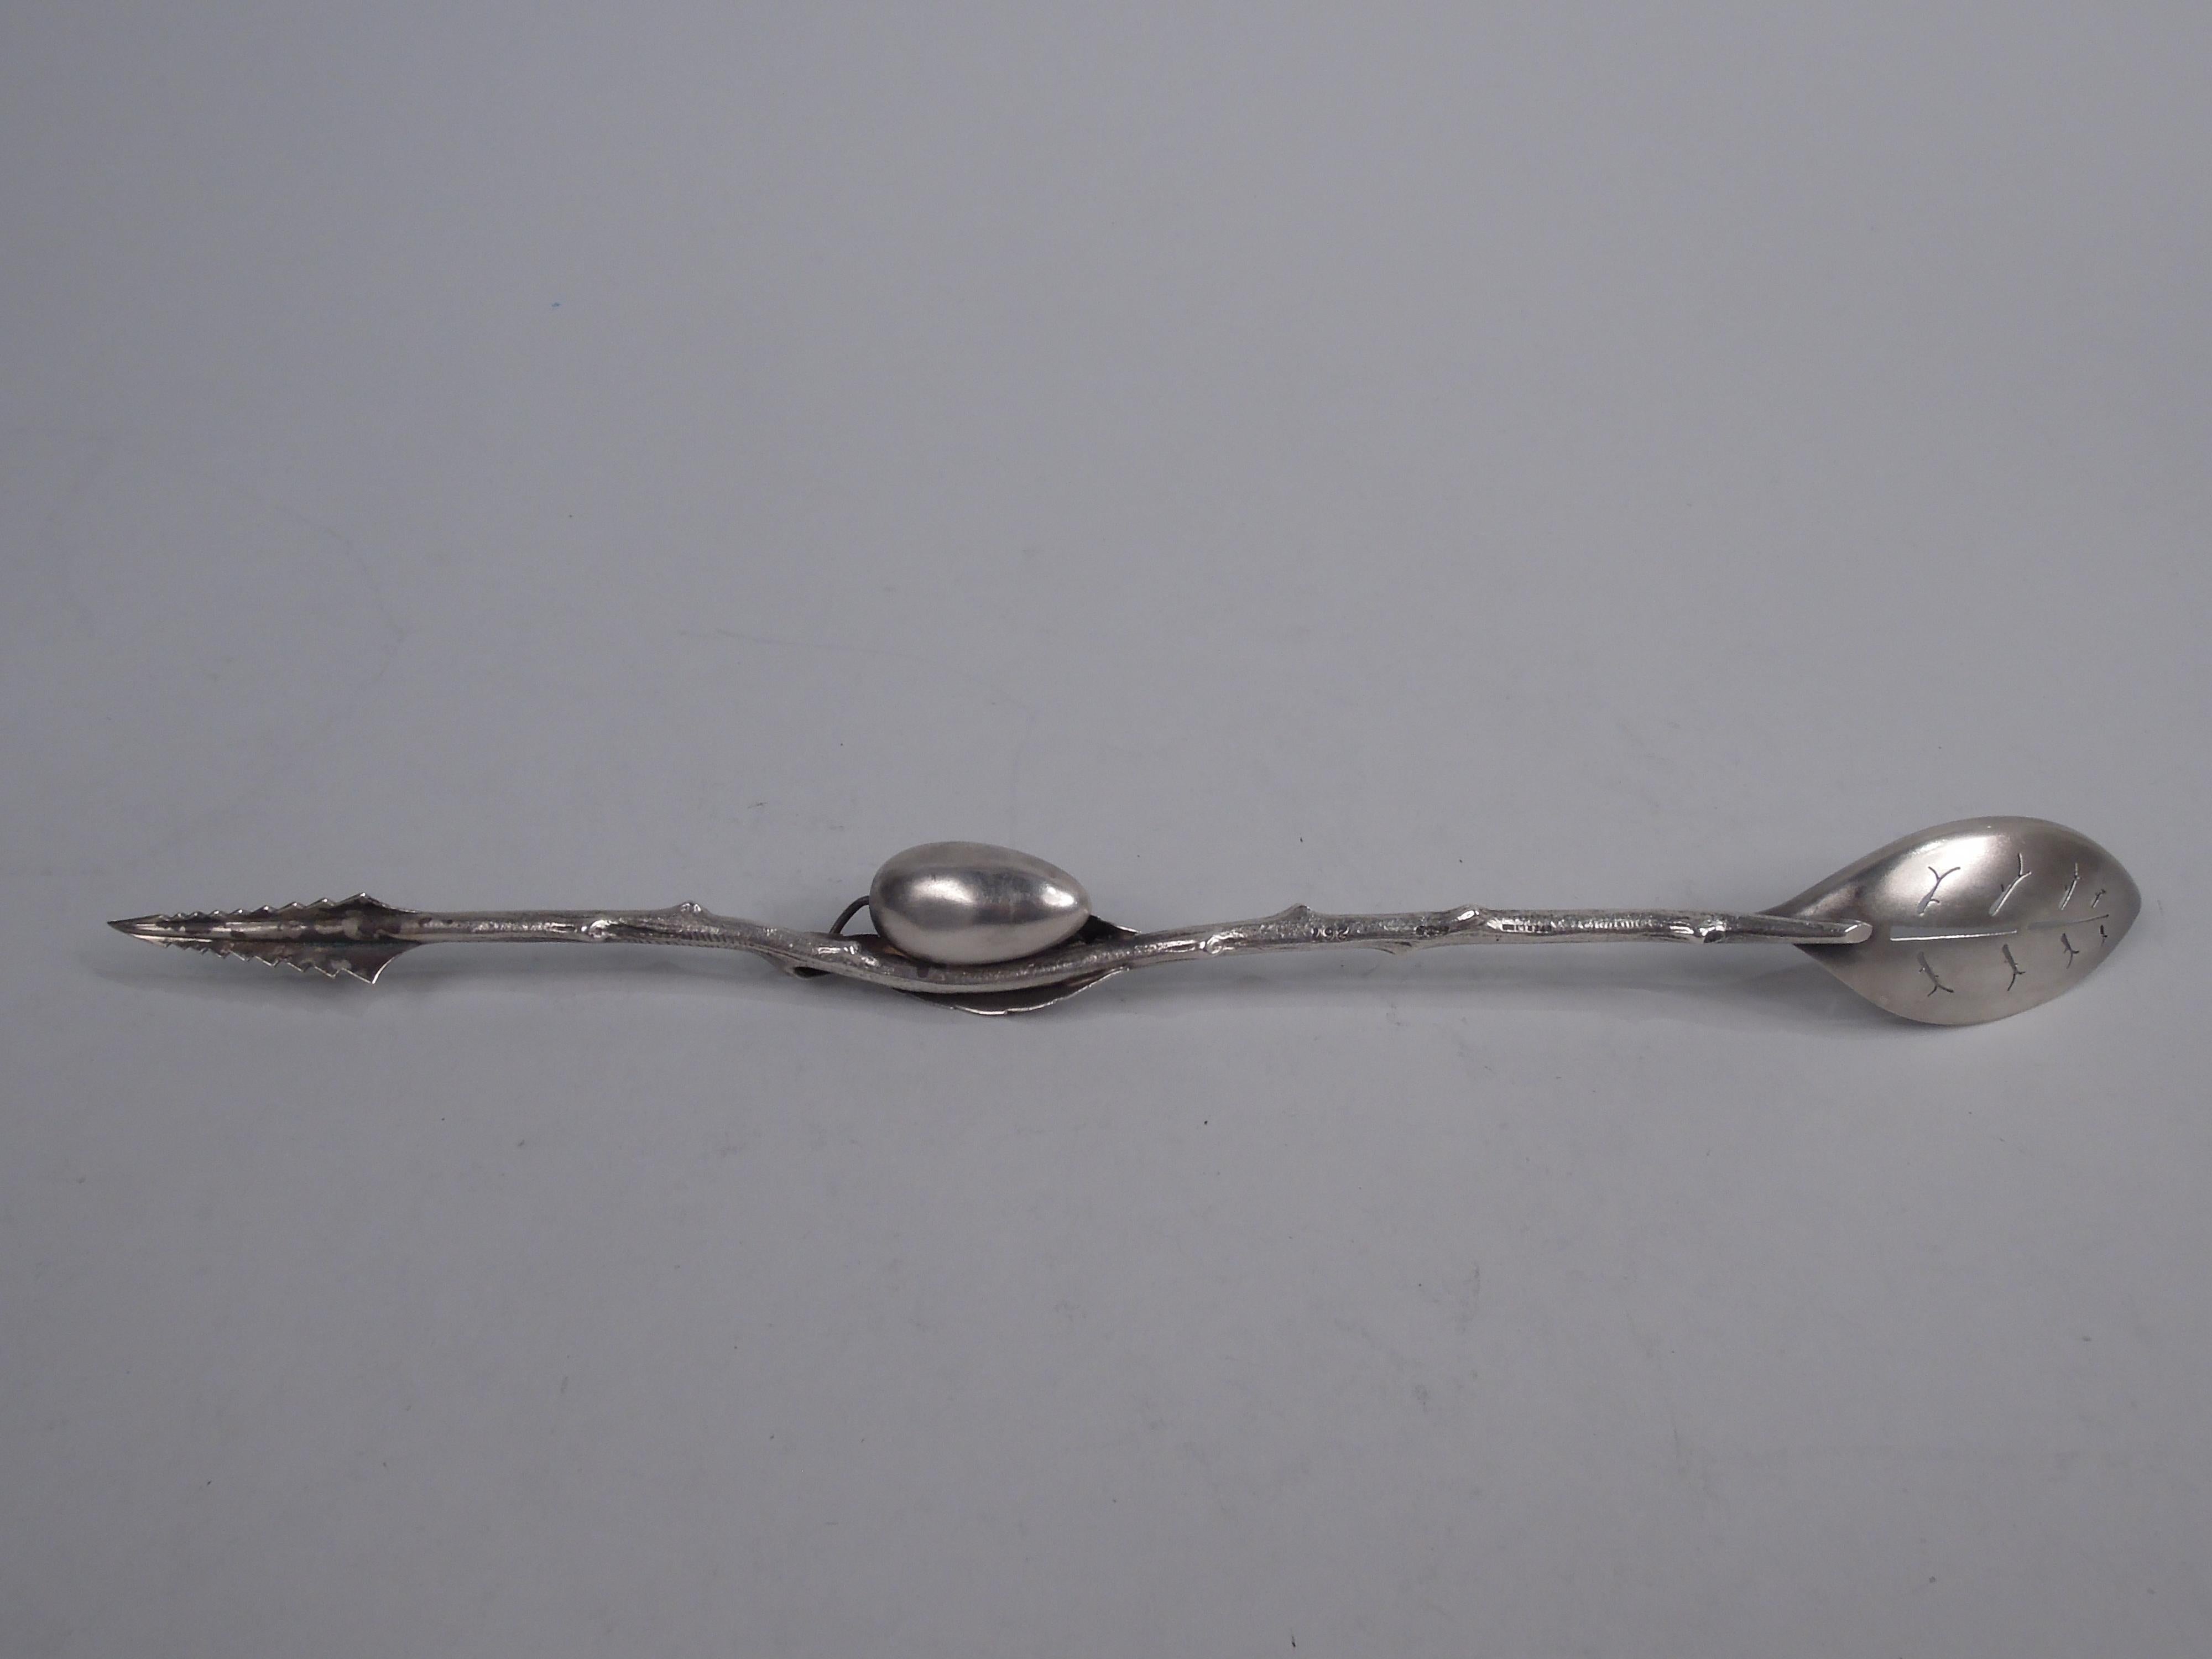 Aesthetic sterling silver olive spoon. Made by Gorham in Providence, ca 1885. Cast stem with entwined leaf and olive. Shallow and pierced bowl with engraved leaves. At other end pick comprising graduated triangles. Butler finish. Fully marked